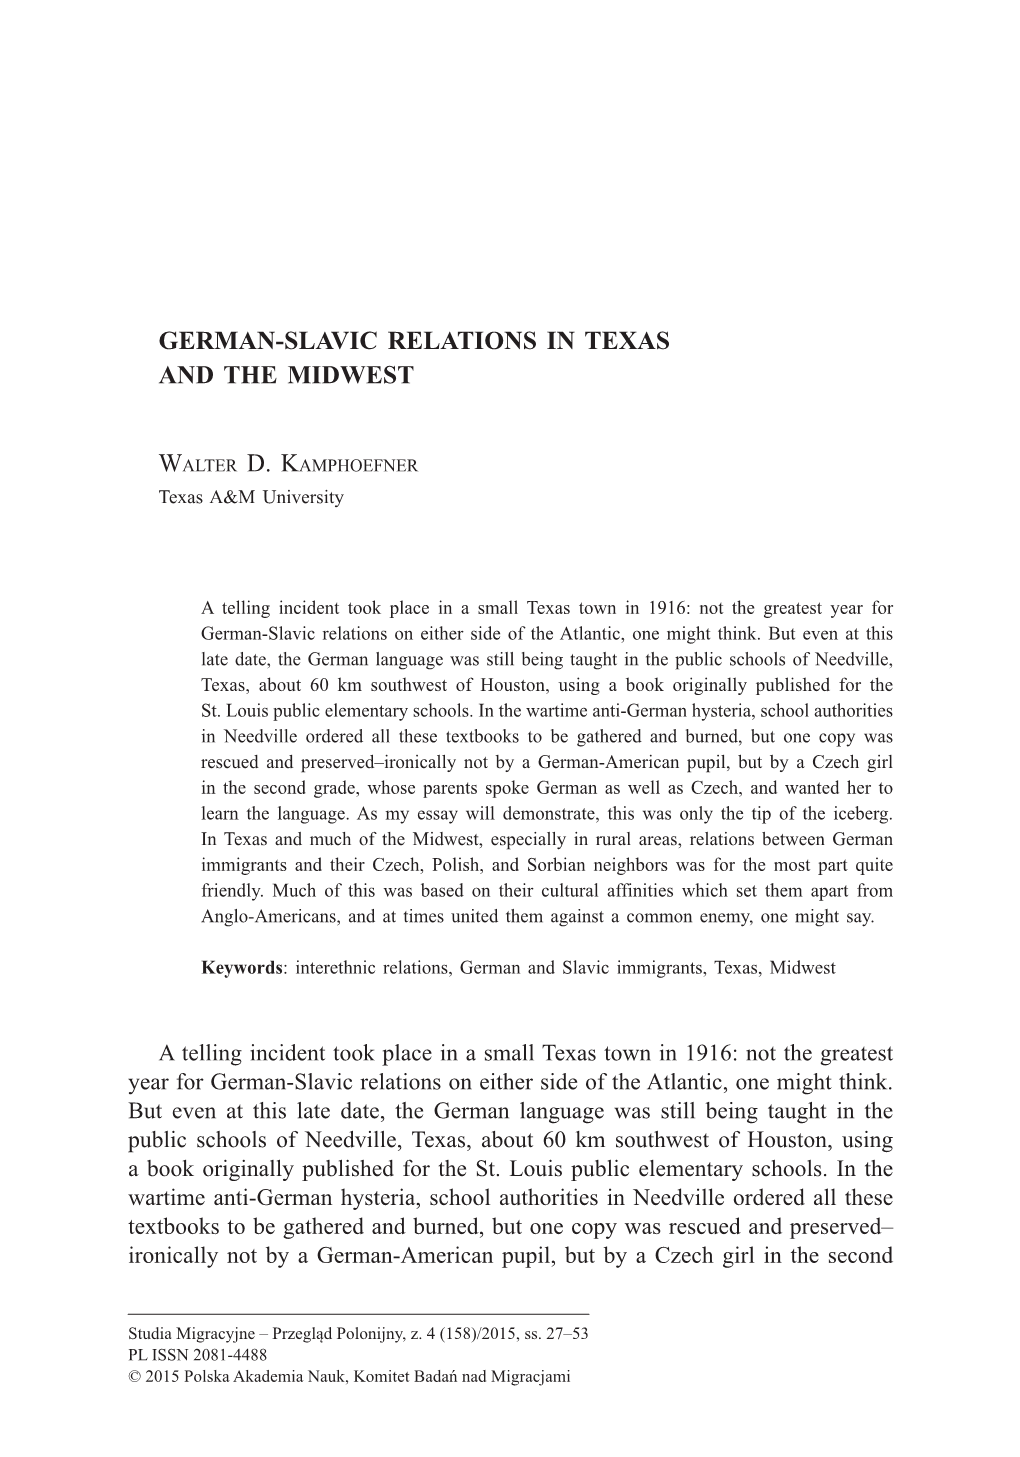 German-Slavic Relations in Texas and the Midwest